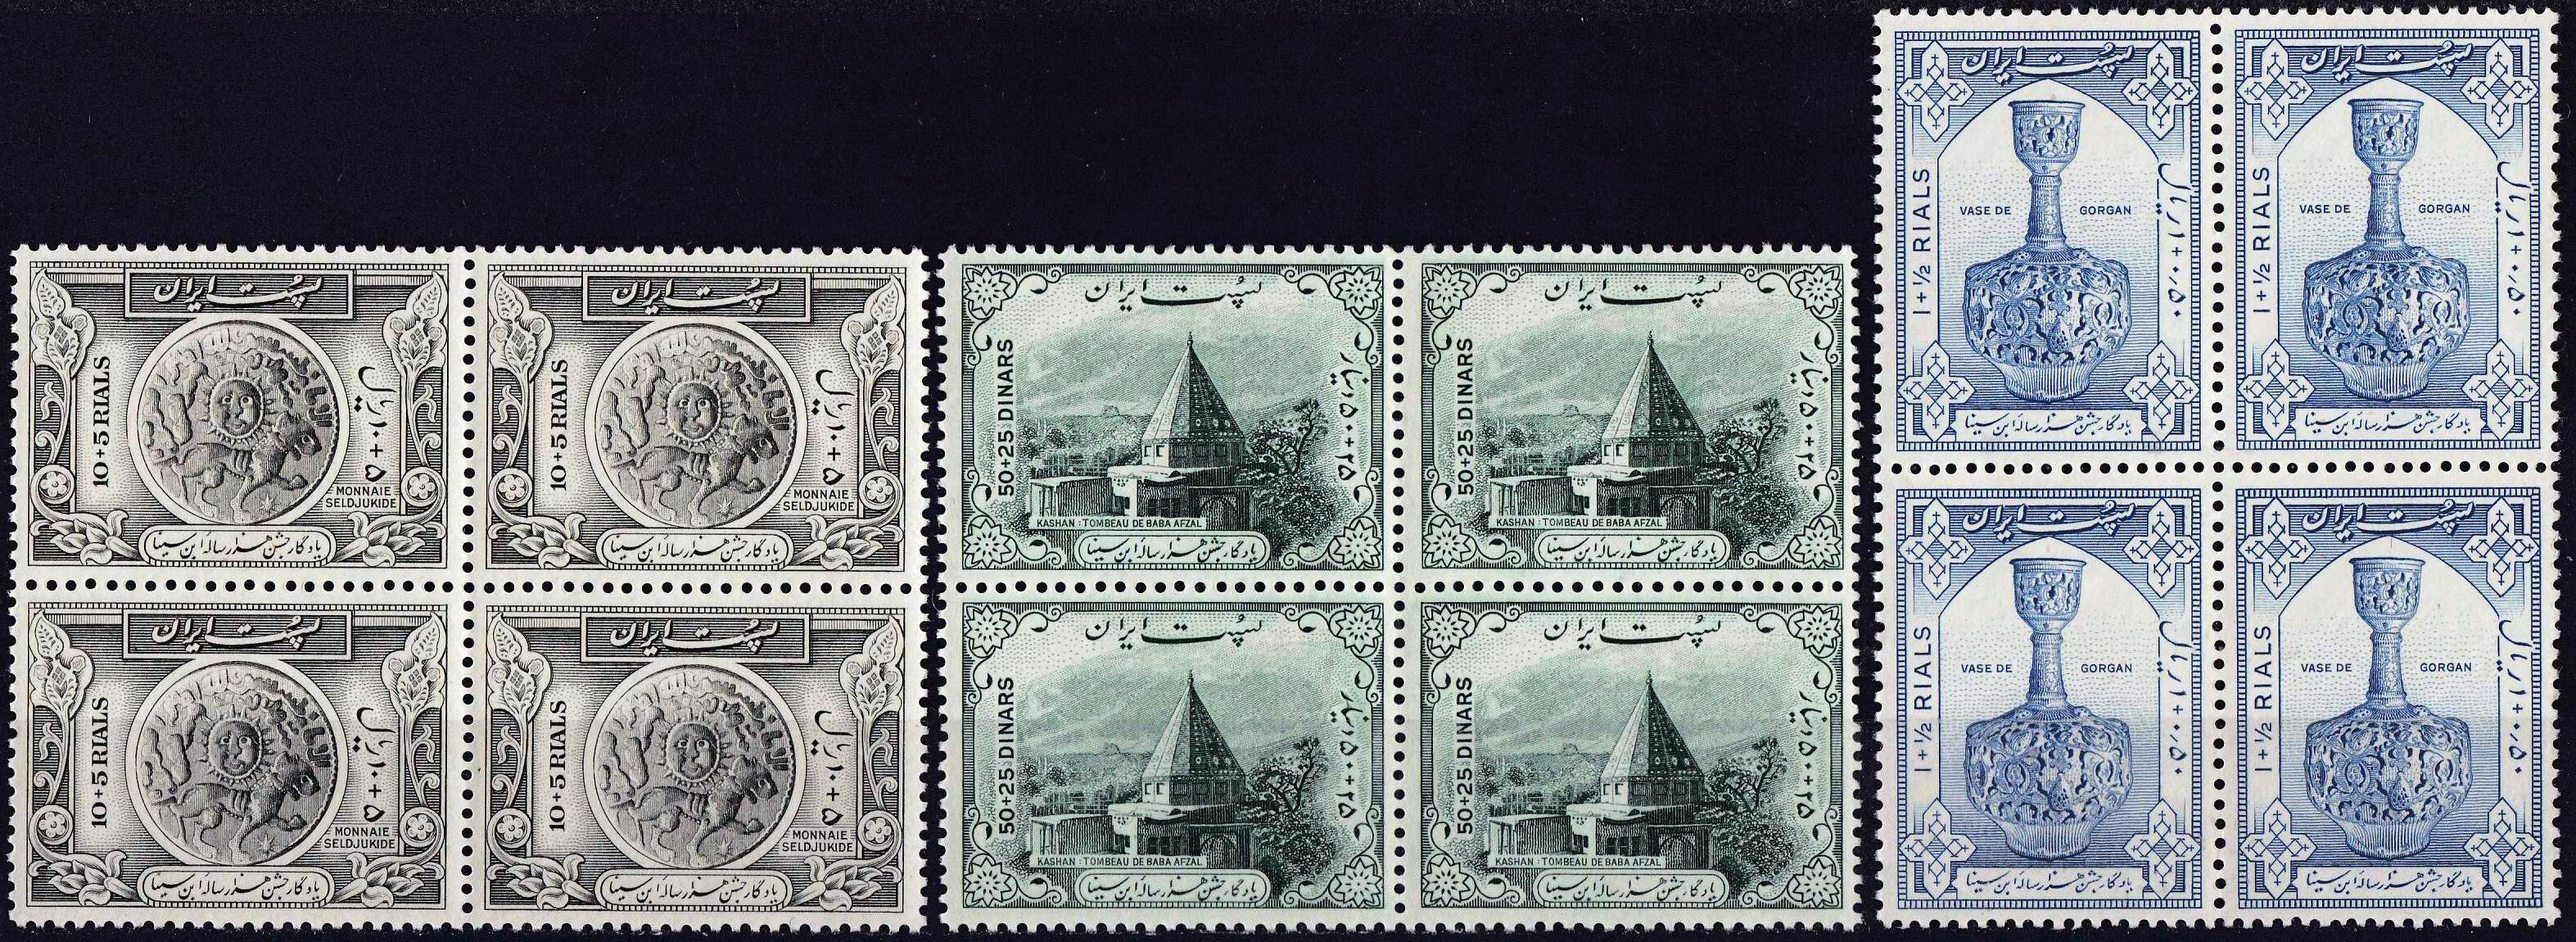 Iran 1948-1954 Stamps Tomb of Avicenna Ibn e Sina - Click Image to Close